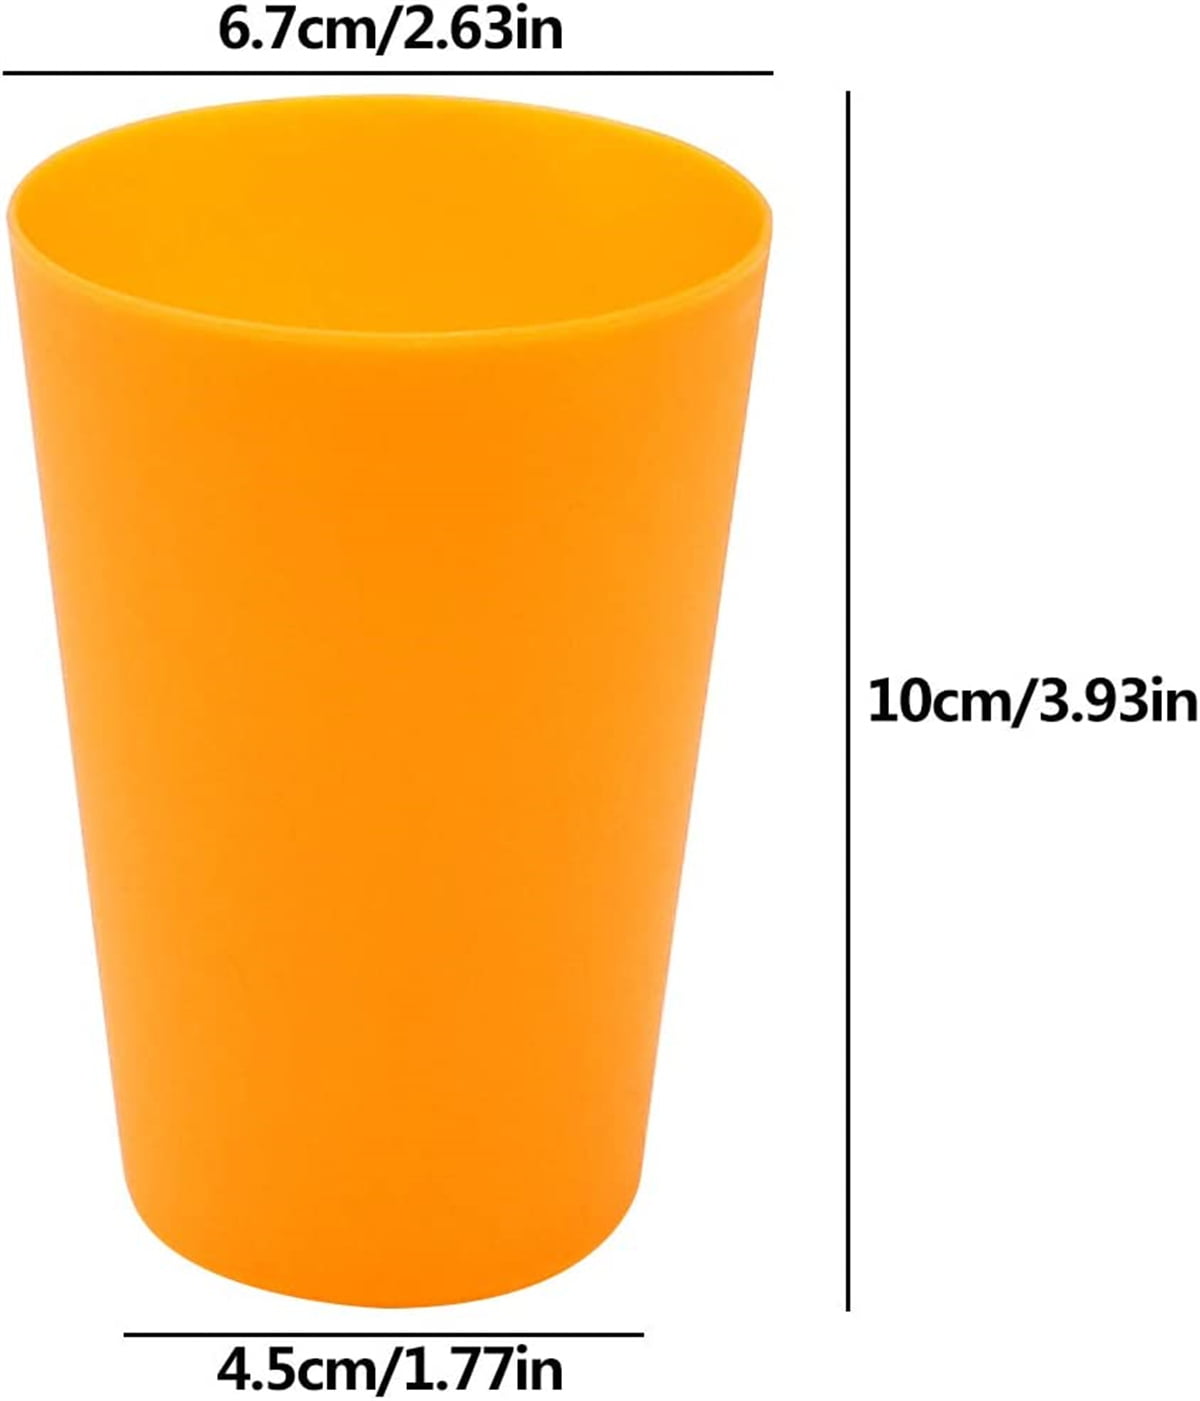 6.5 Ounce Kids Cups, 12 Pack Kids Plastic Cups in 12 Assorted